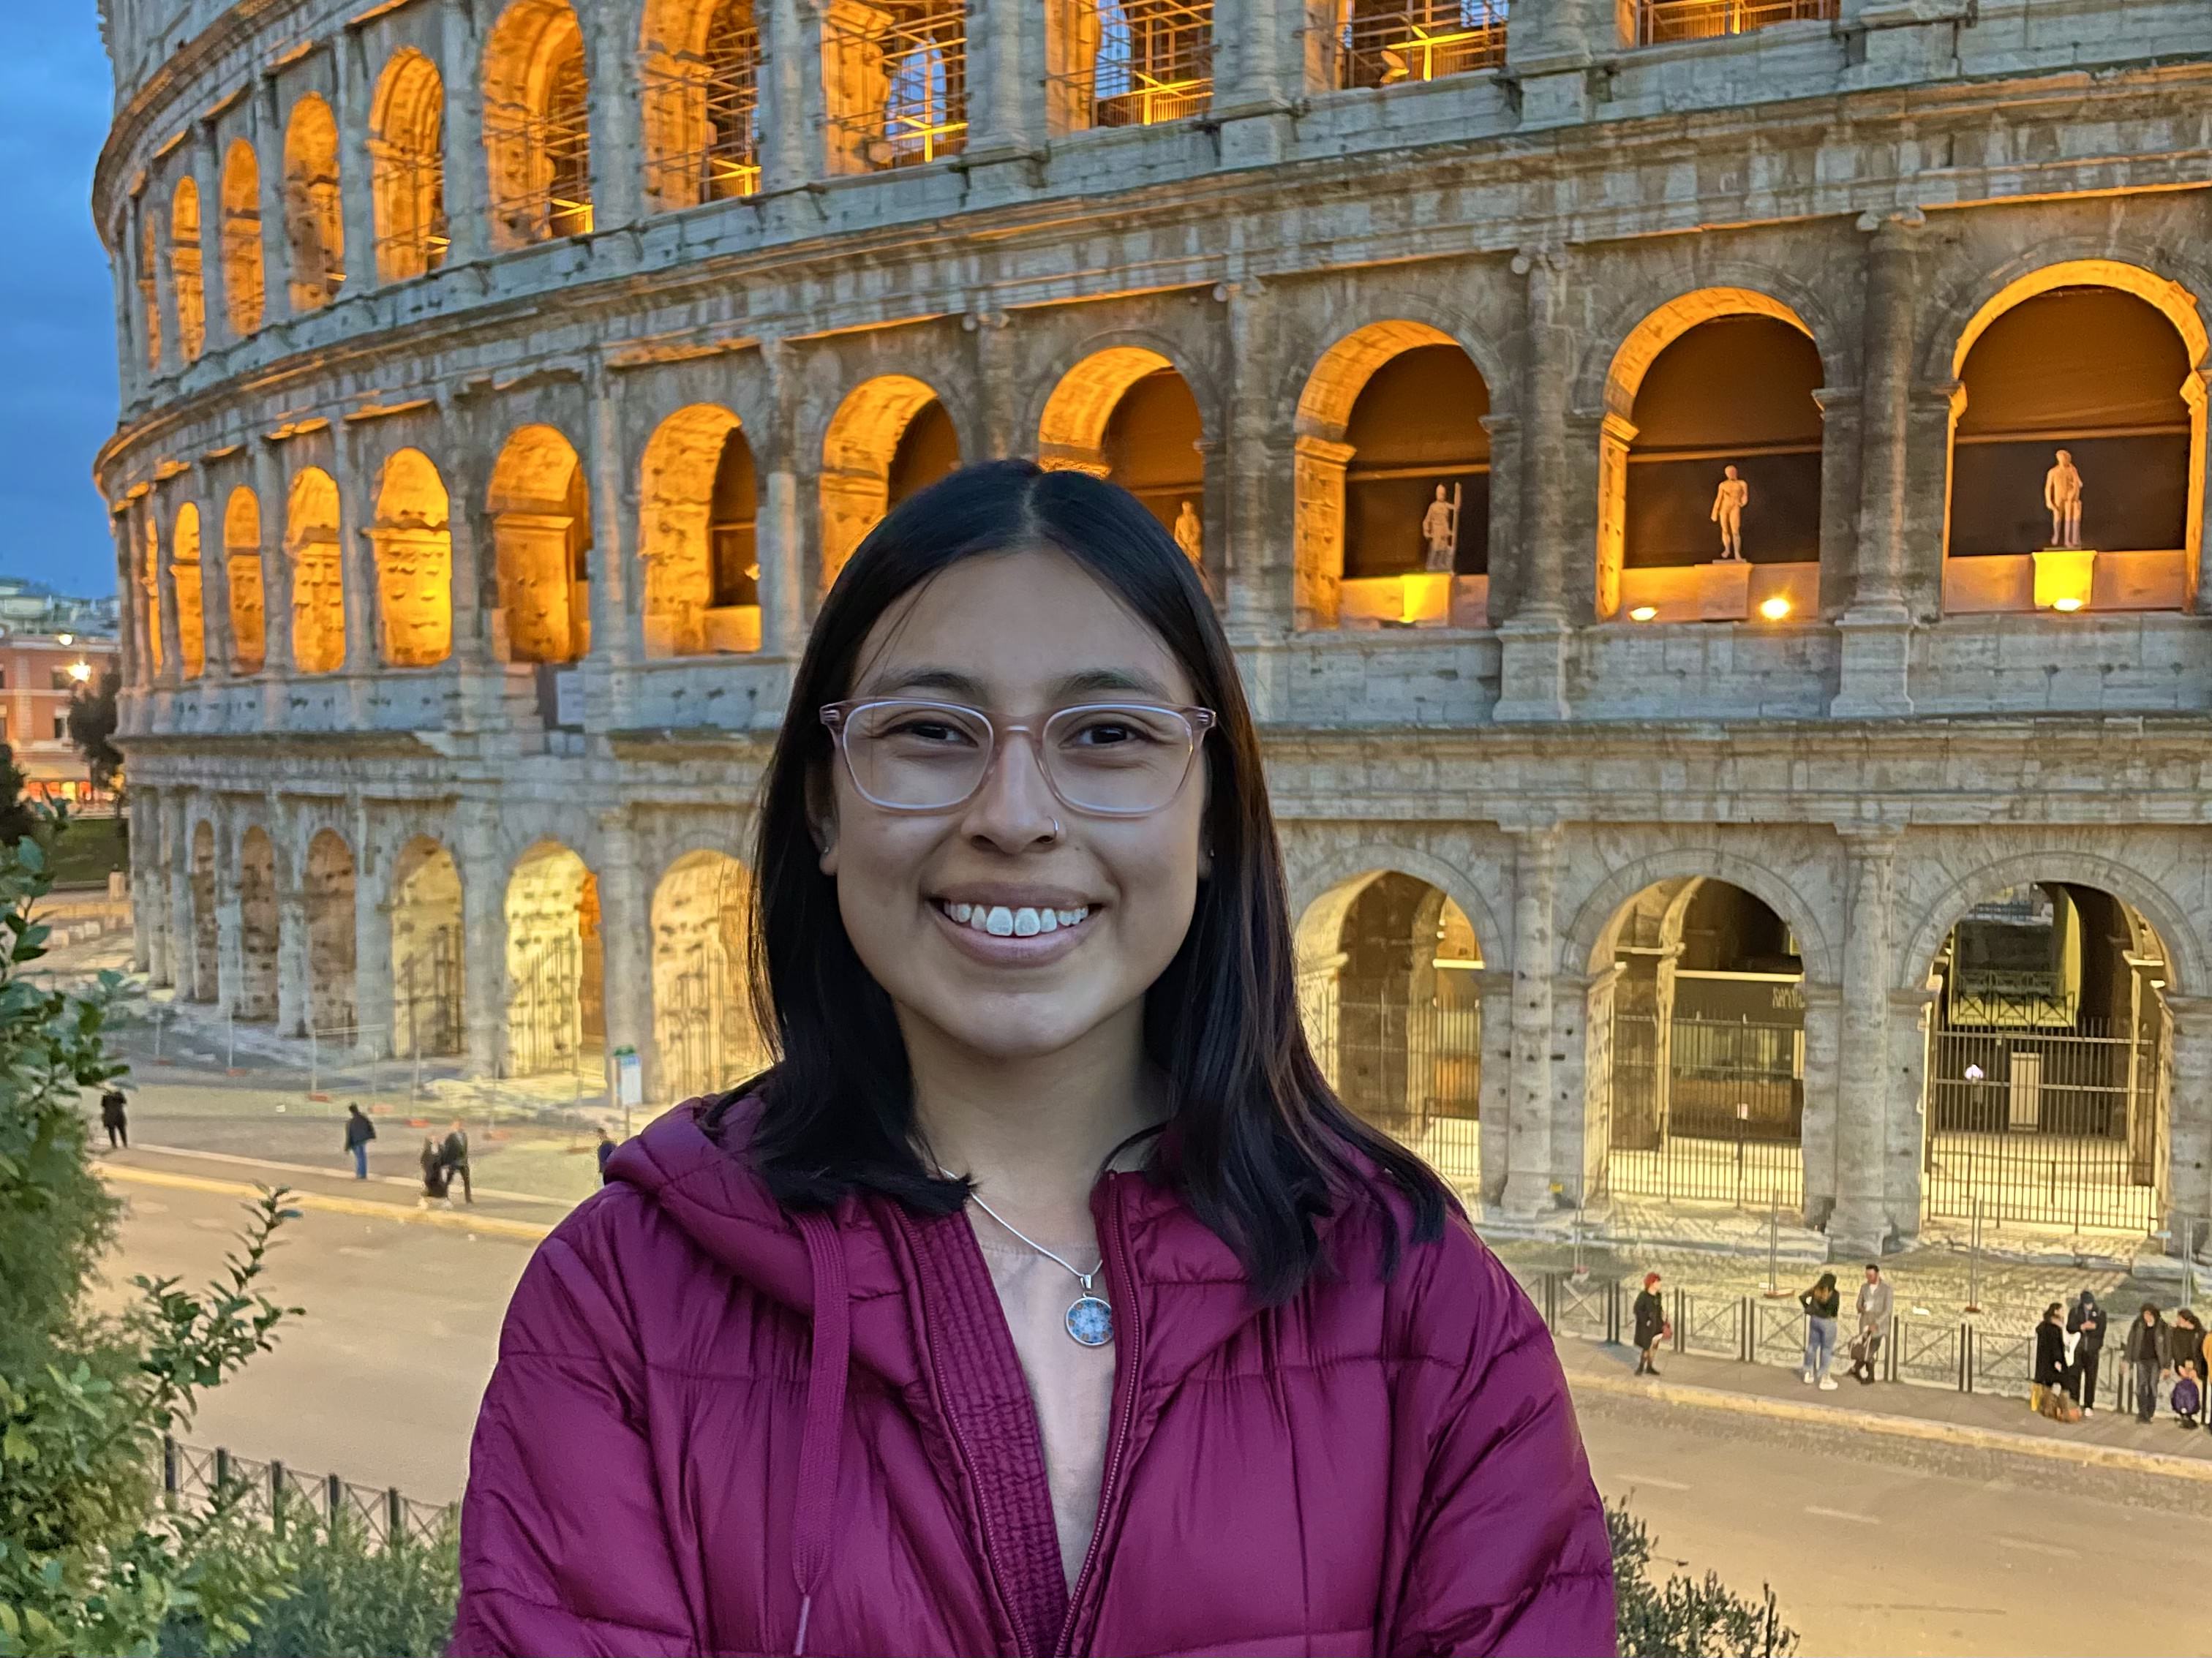 Alex smiling in front of the Roman Colosseum lit up at night.